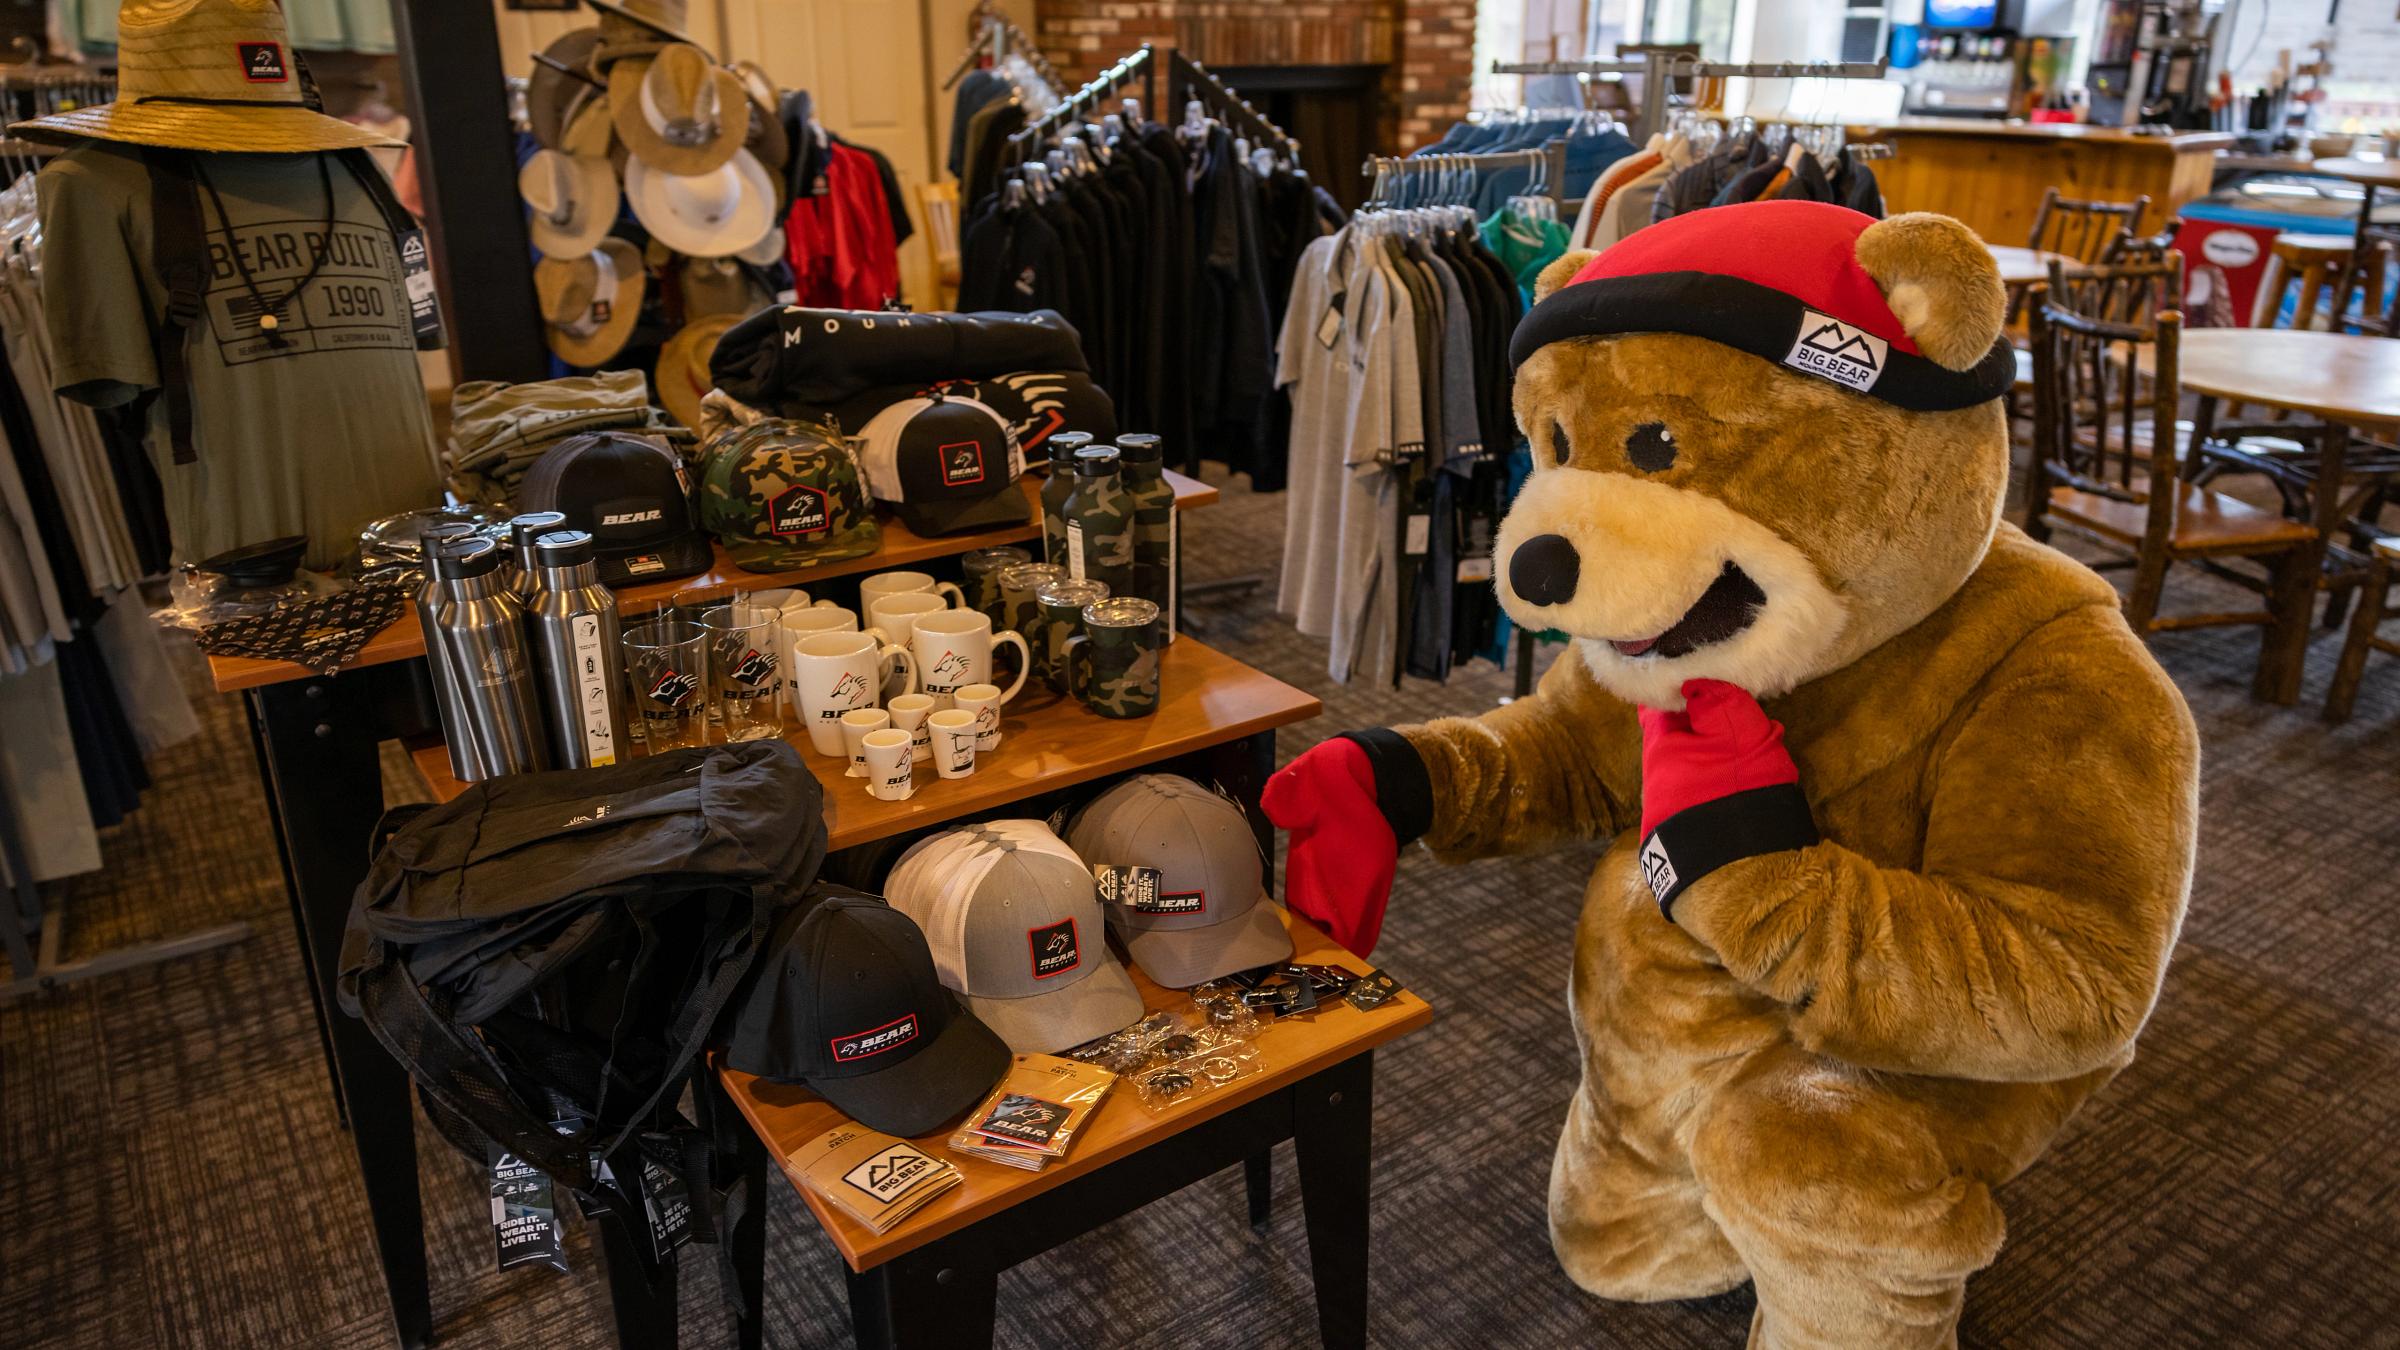 Biggie shopping at the pro shop